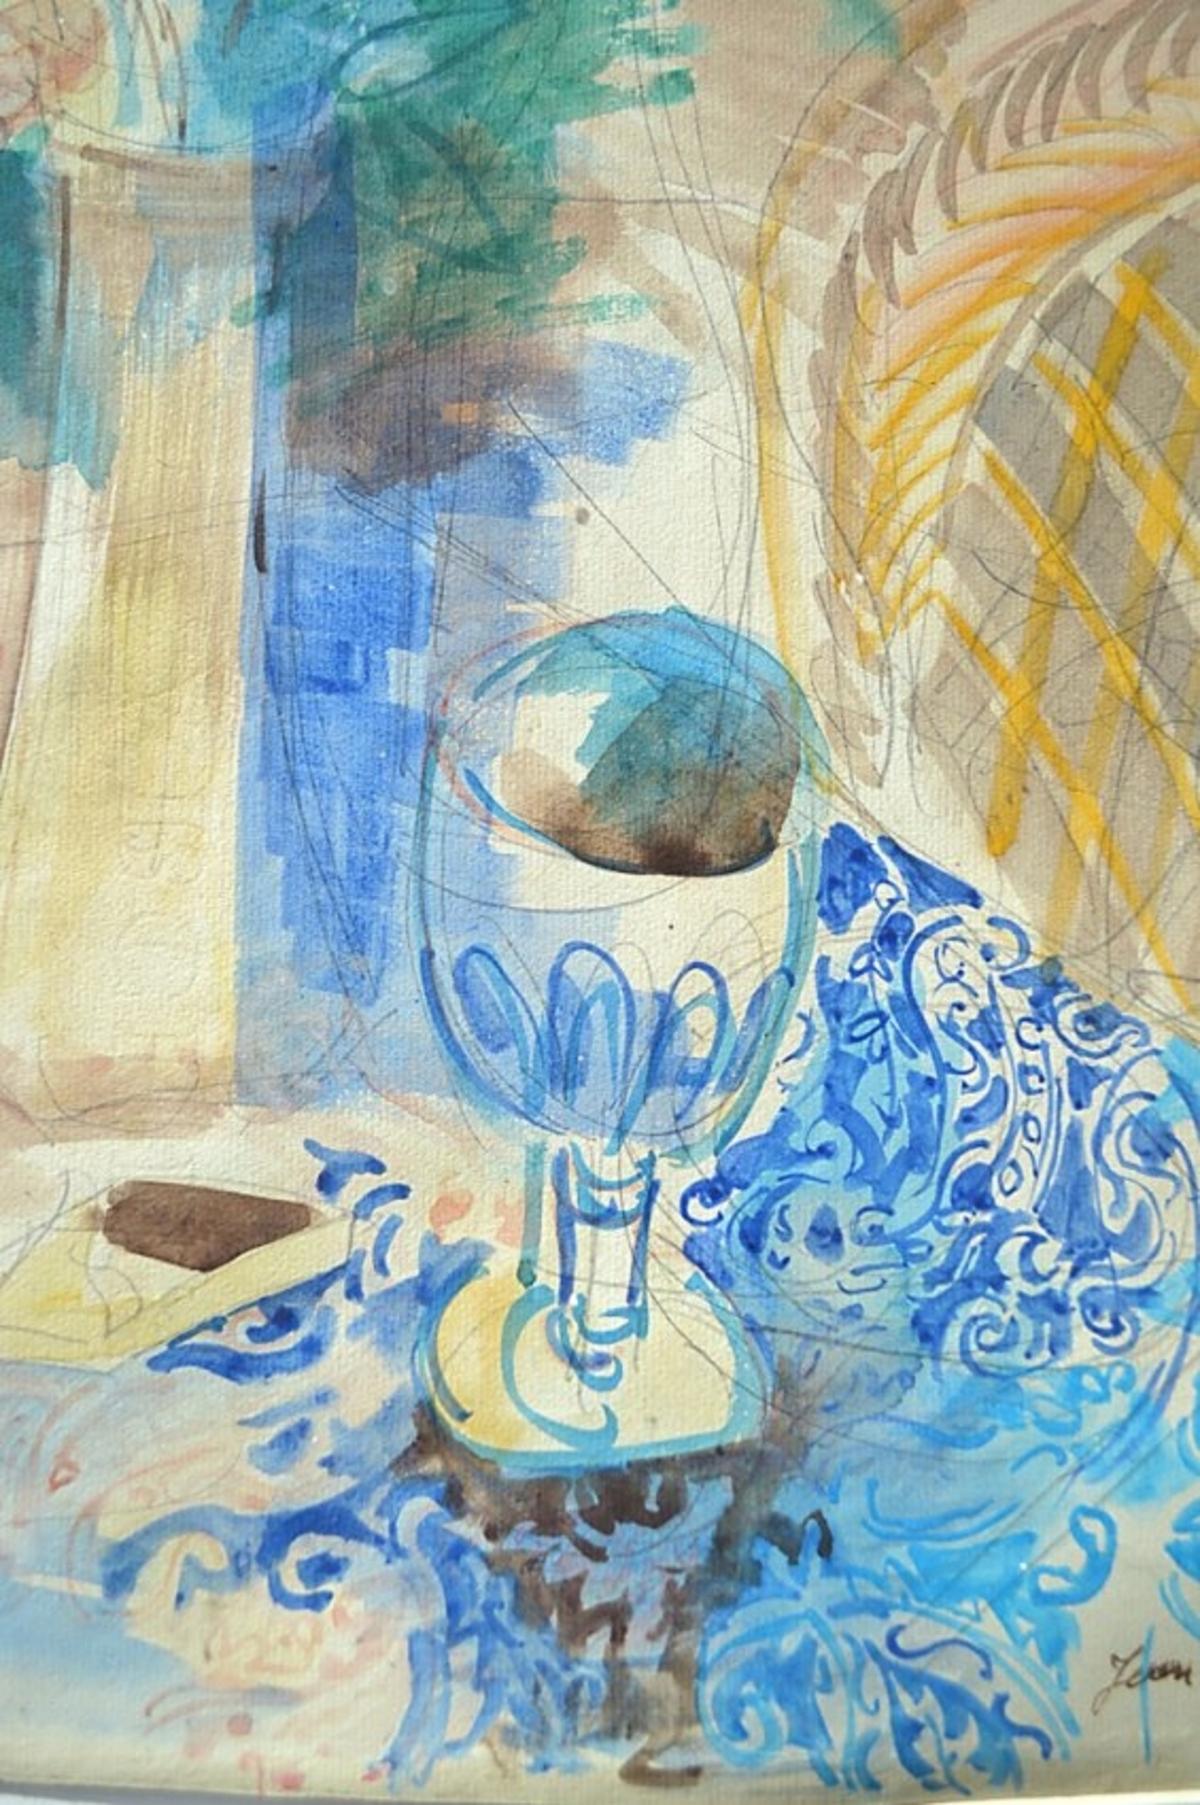 Jean Dufy, still life, watercolor/pencil (French, 1888-1964)
Still life, flowers in a vase
signed Jean Dufy, lower right
watercolor and pencil on paper
Size: 23 1/2 by 17 1/2 in. (68.7 x 43.7 cm.);
Overall 35 by 29 in.

Provenance: Purchased